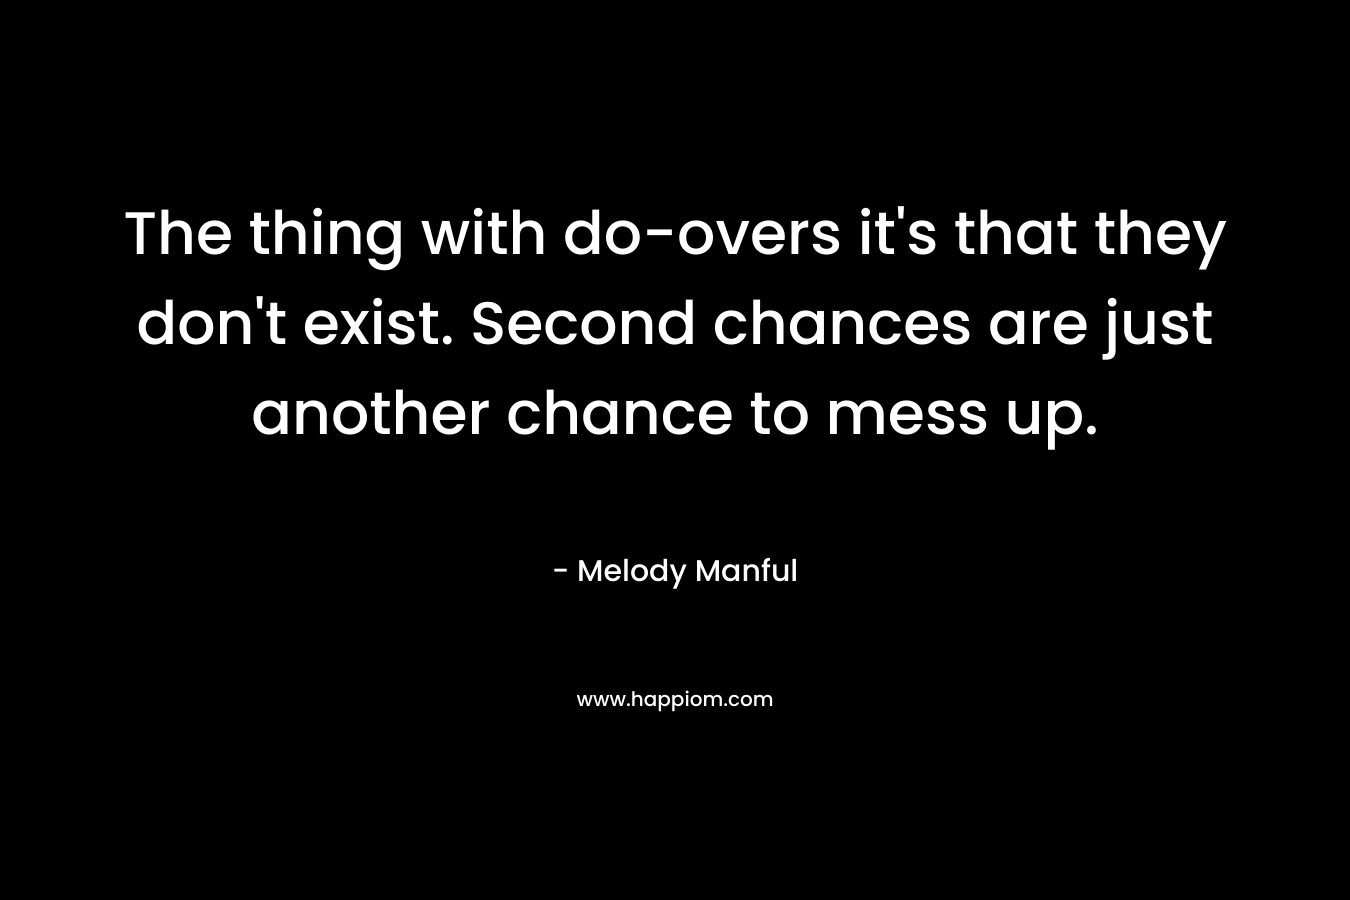 The thing with do-overs it’s that they don’t exist. Second chances are just another chance to mess up. – Melody Manful